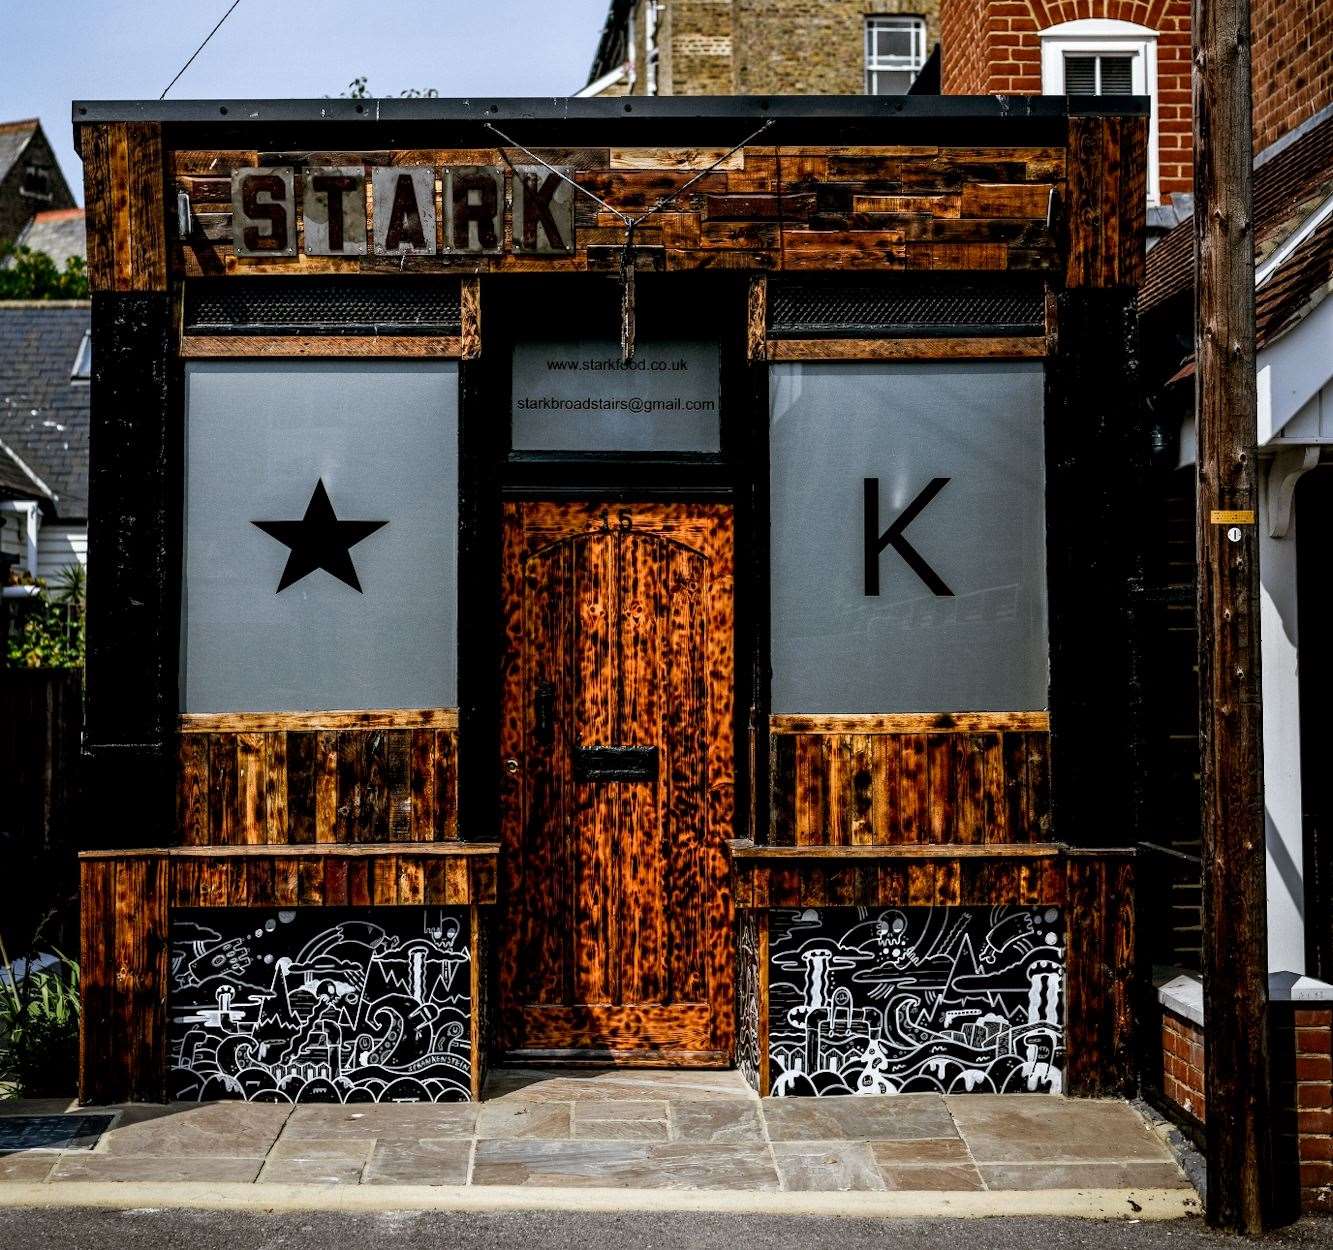 Stark is based in Oscar Road, Broadstairs. Picture: Key and Quill